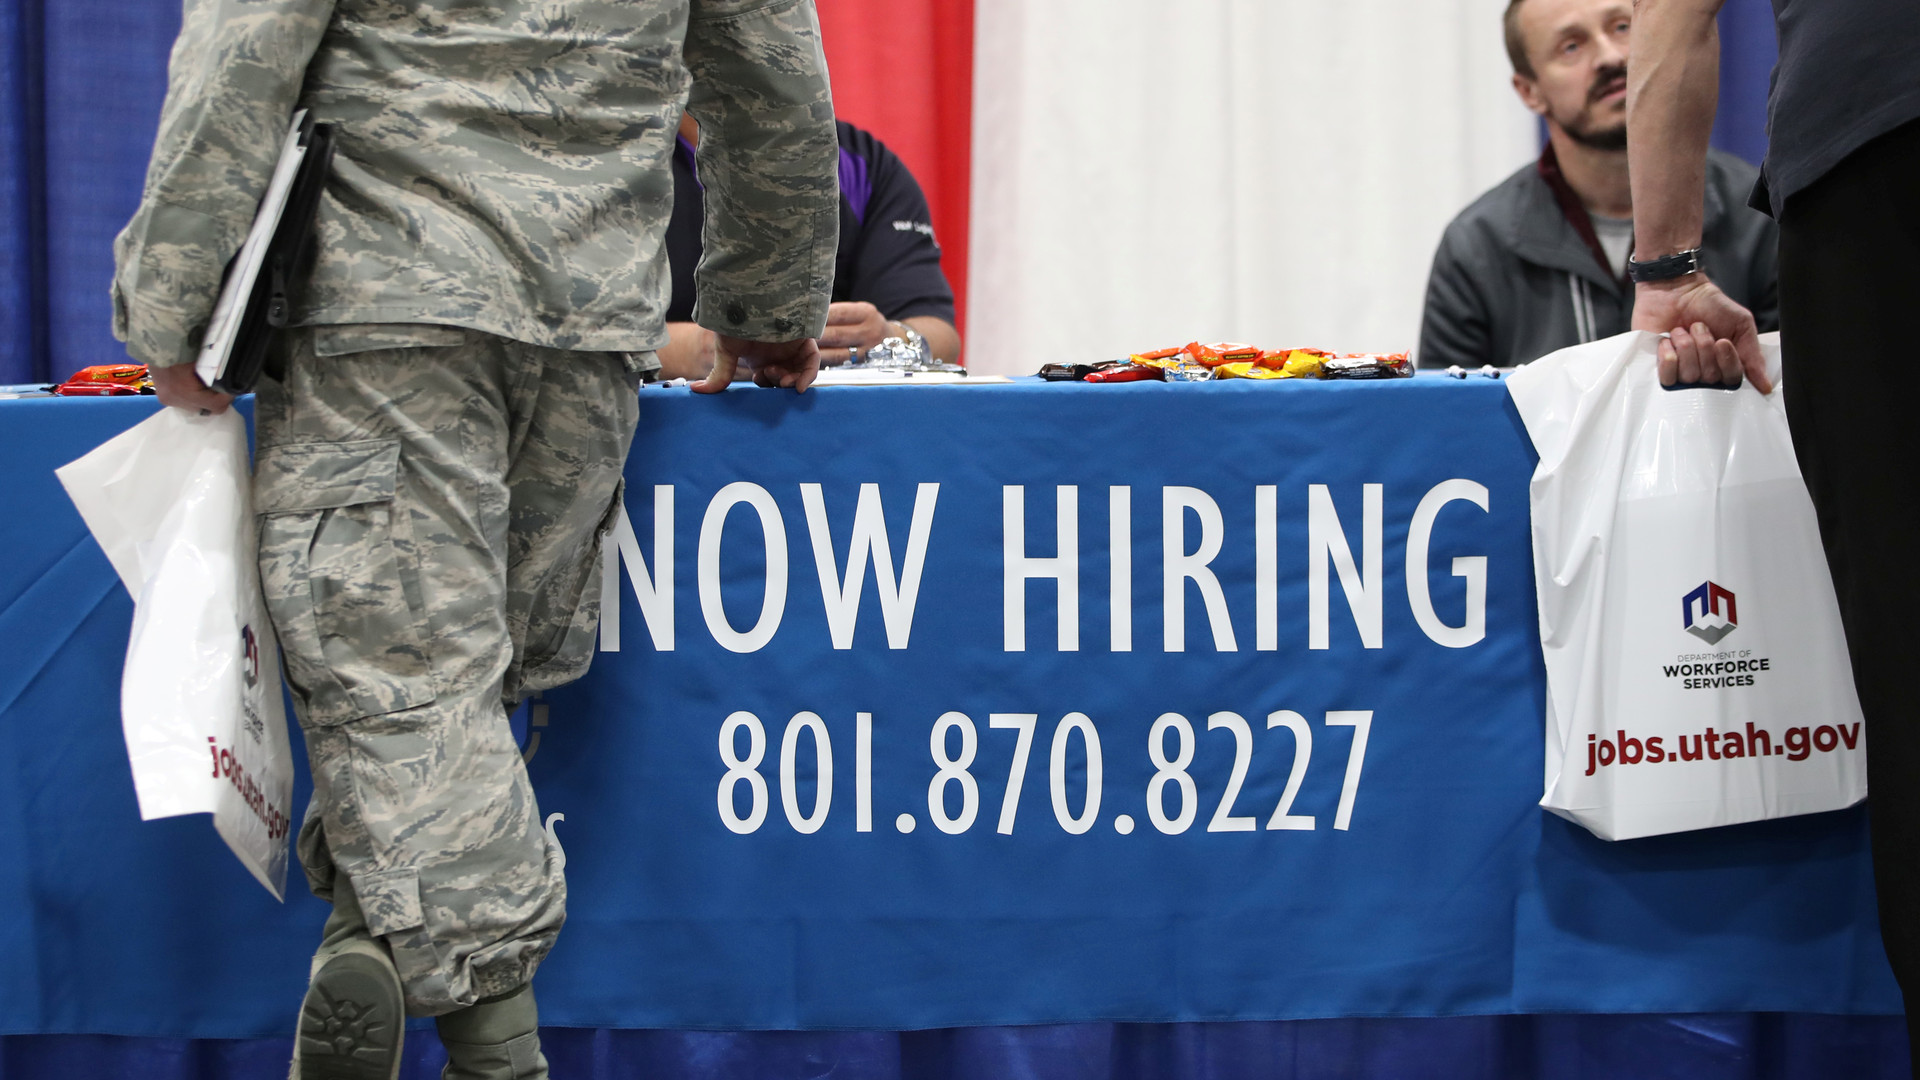 Veterans and military personnel discuss job opportunities at a military job fair in Sandy, Utah